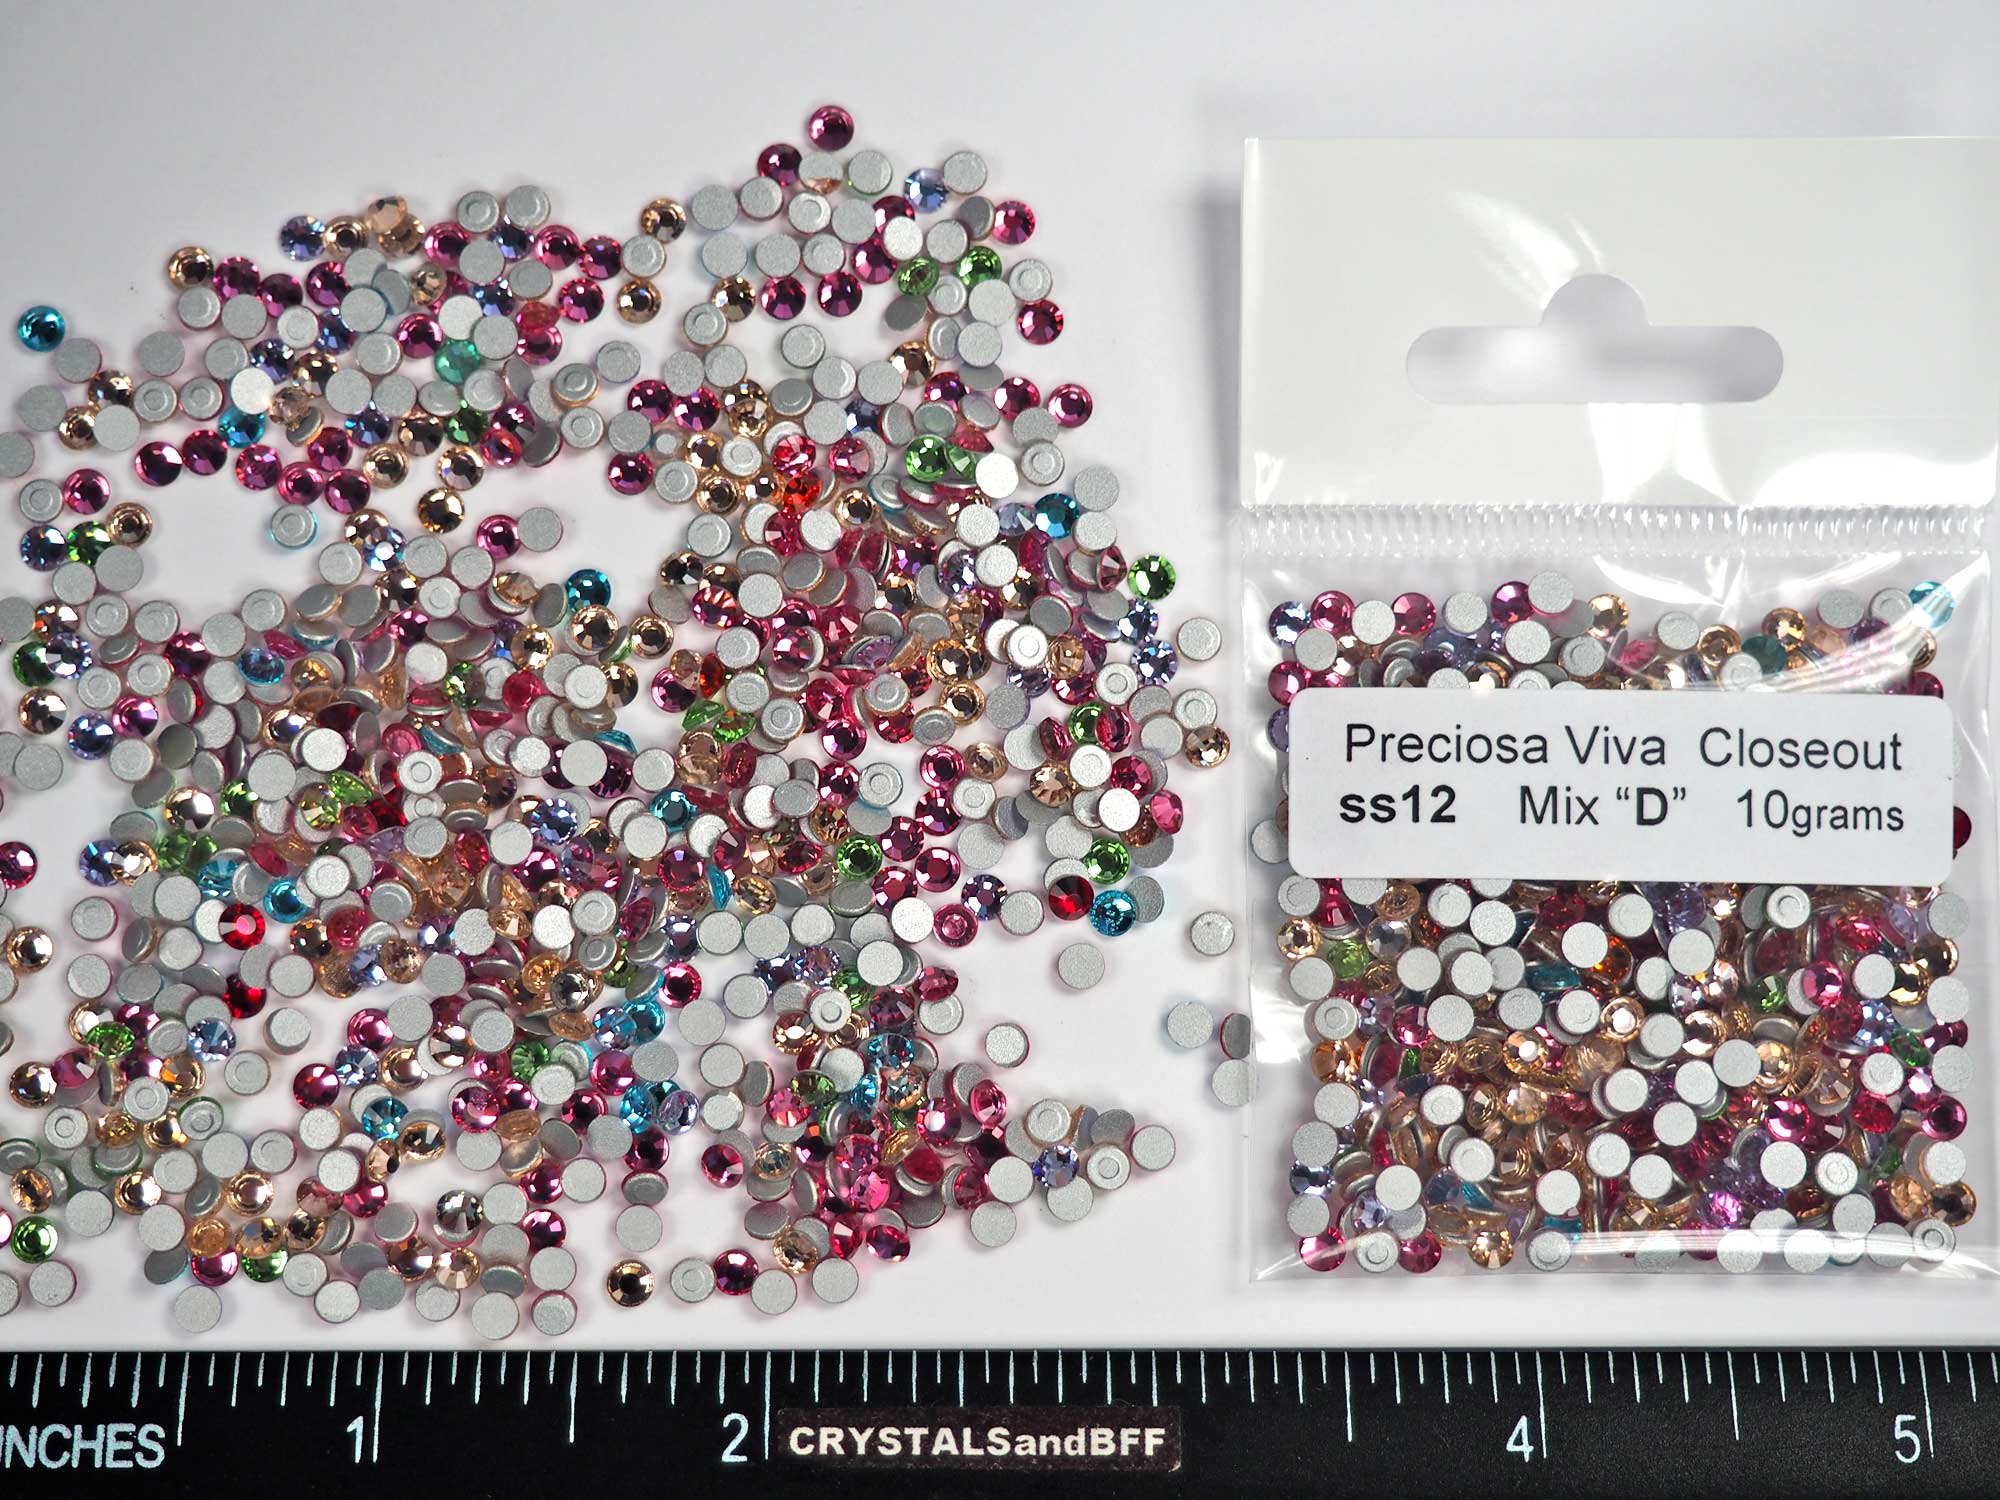 Mix Color "D" CLOSEOUT, ss12, 10grams of Preciosa VIVA Chaton Roses (Rhinestone Flatbacks), Genuine Czech Crystals, nail art BY THE WEIGHT